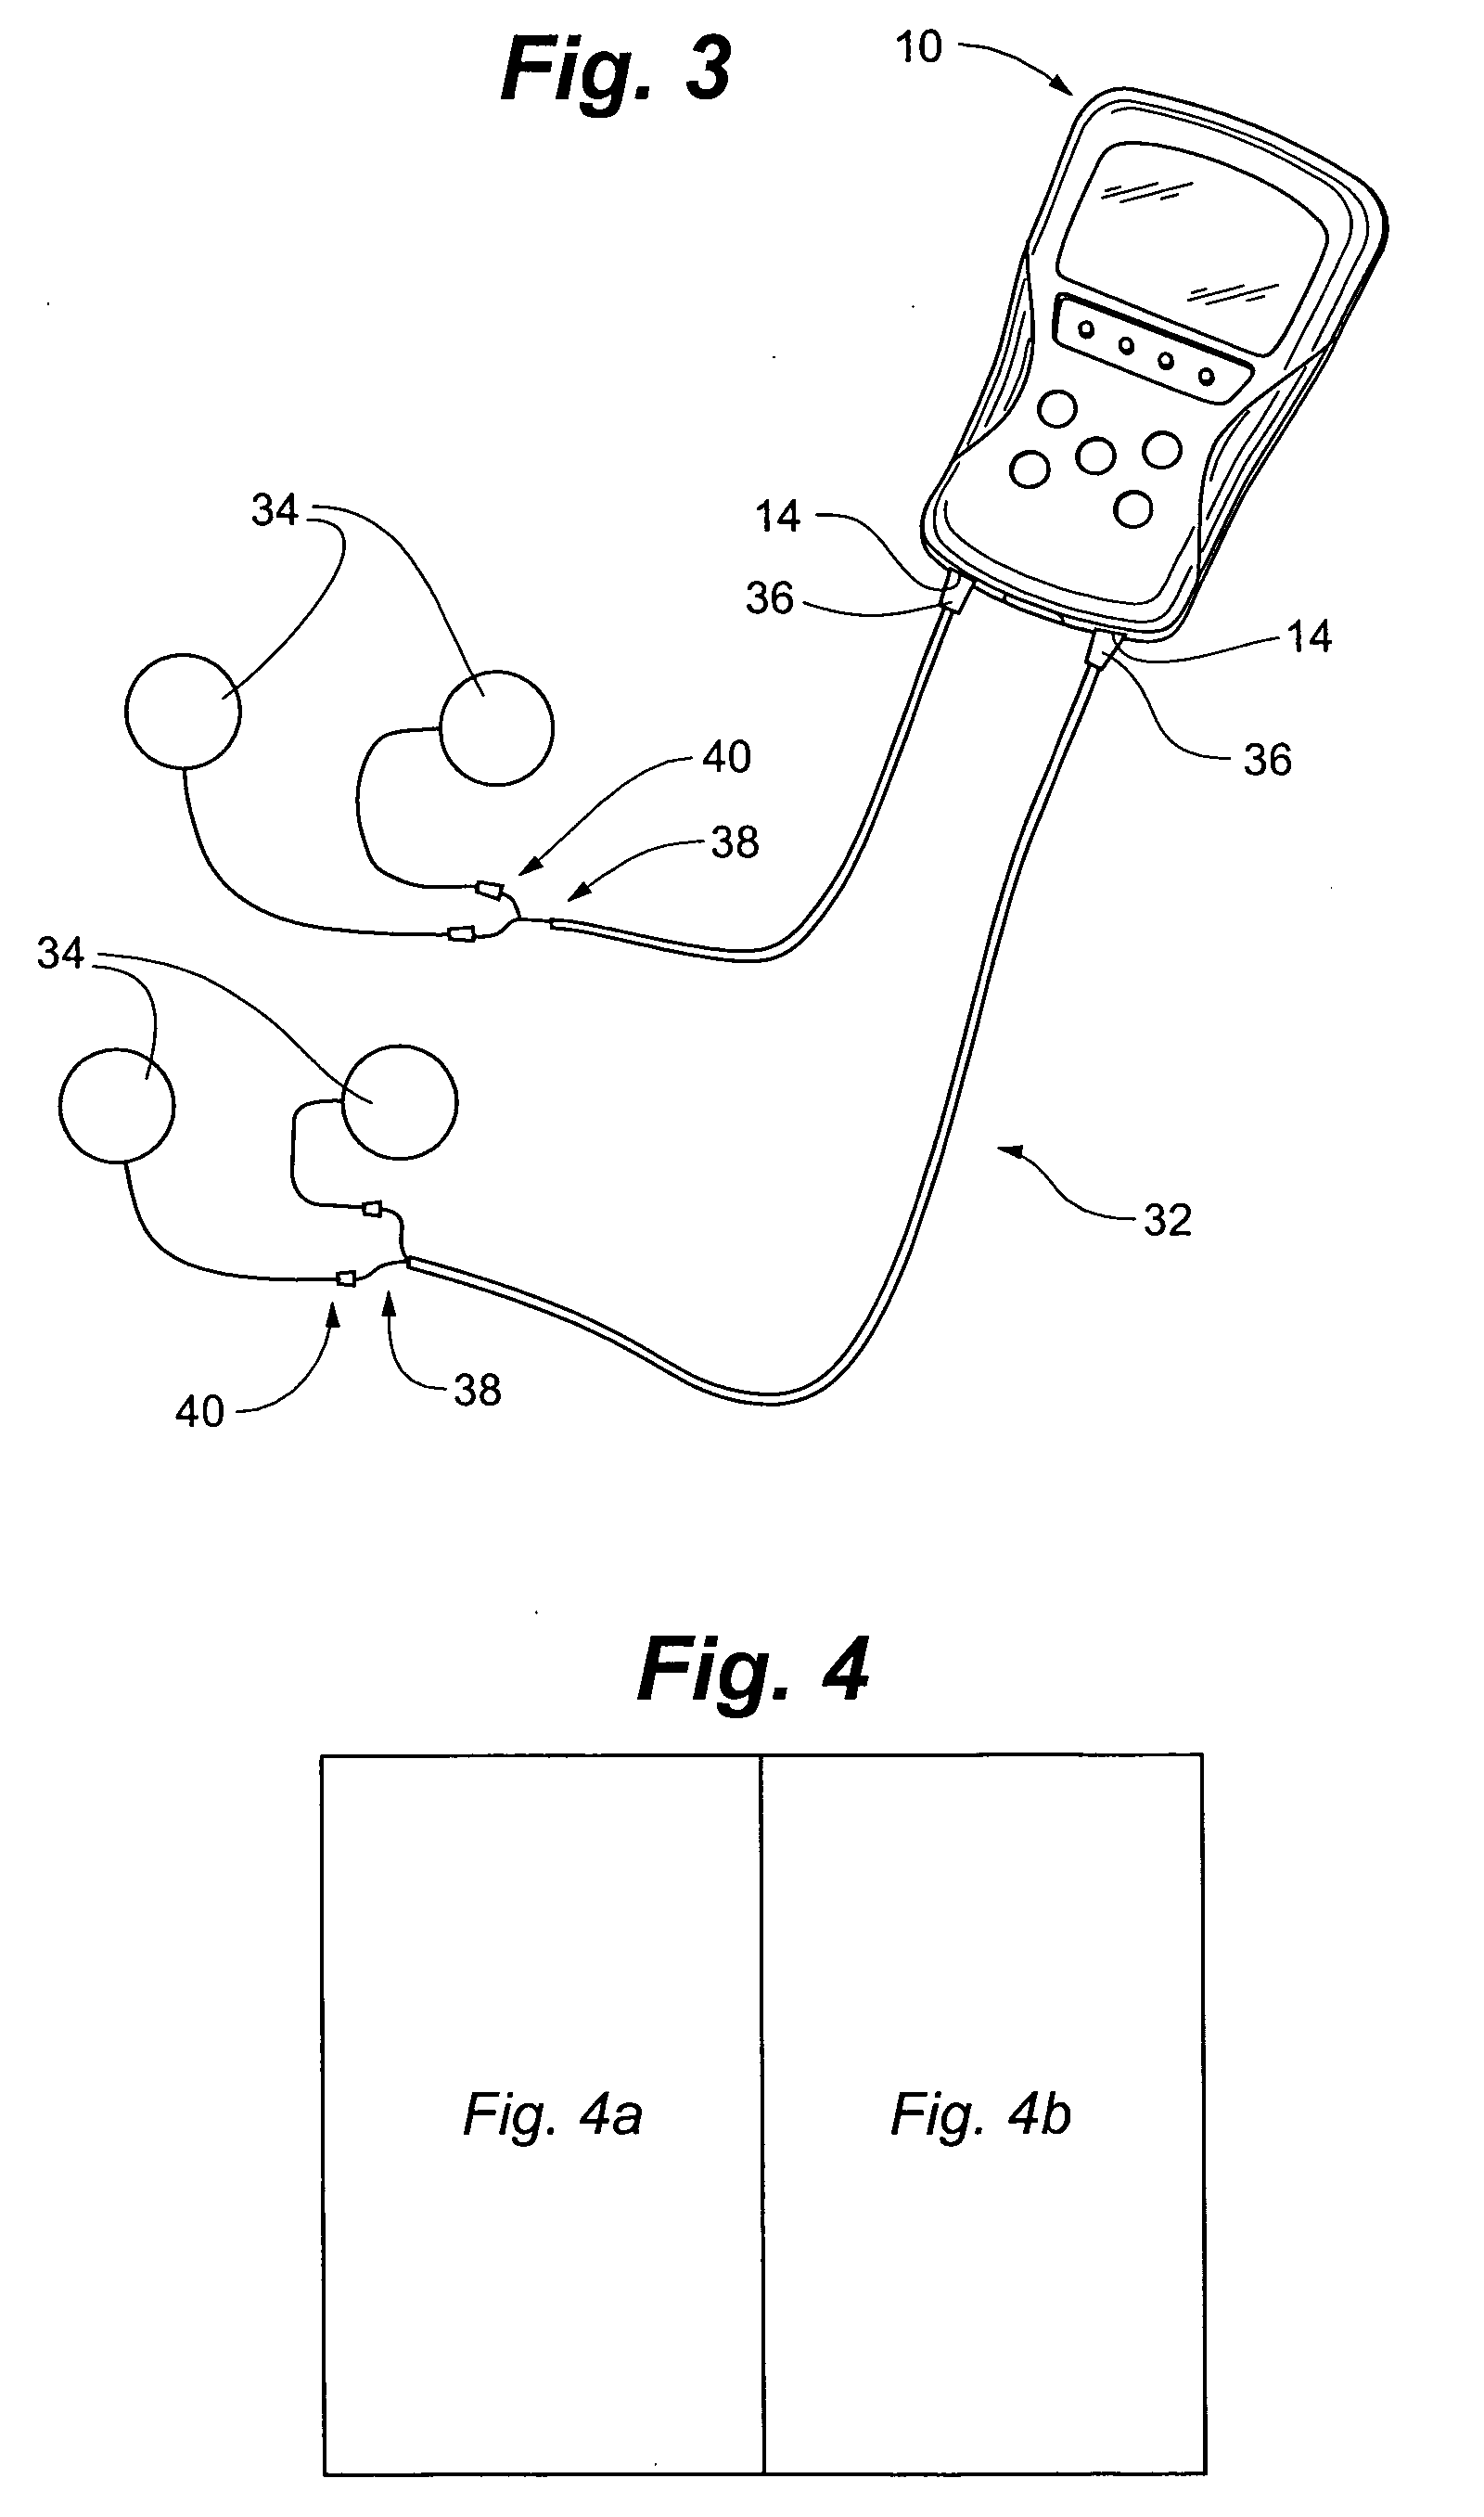 Interferential and neuromuscular electrical stimulation system and apparatus